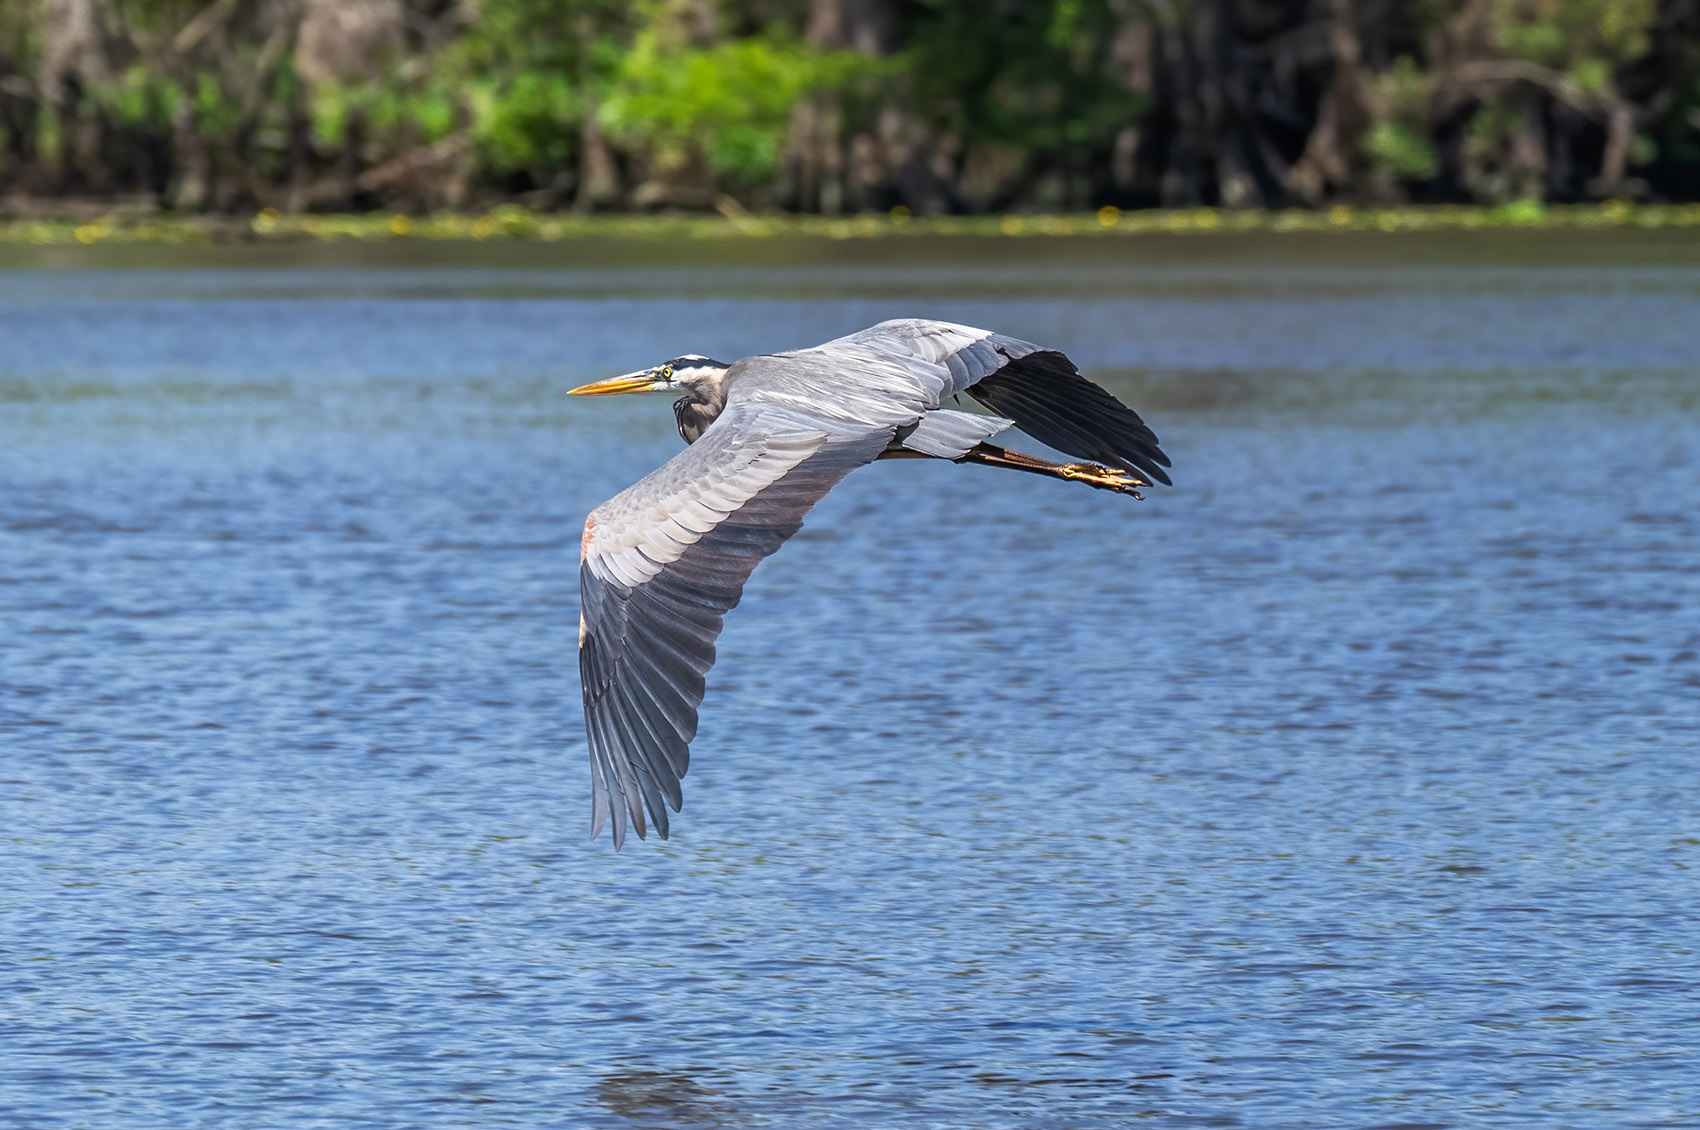 Great blue heron flying over river